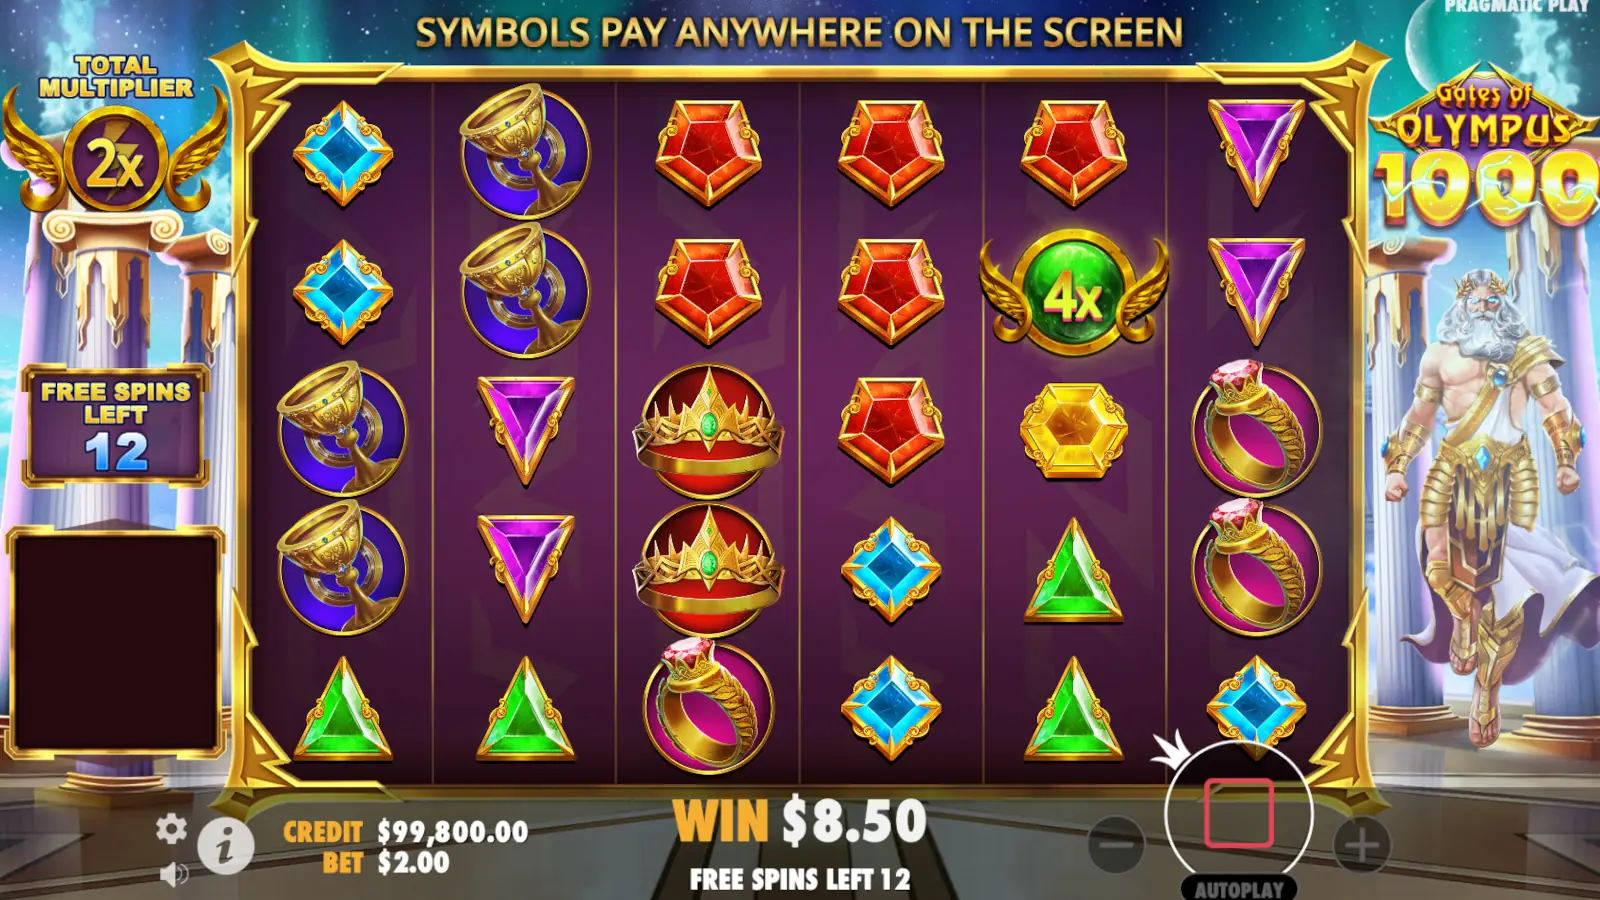 Gates of Olympus 1000 Free Spins Rules